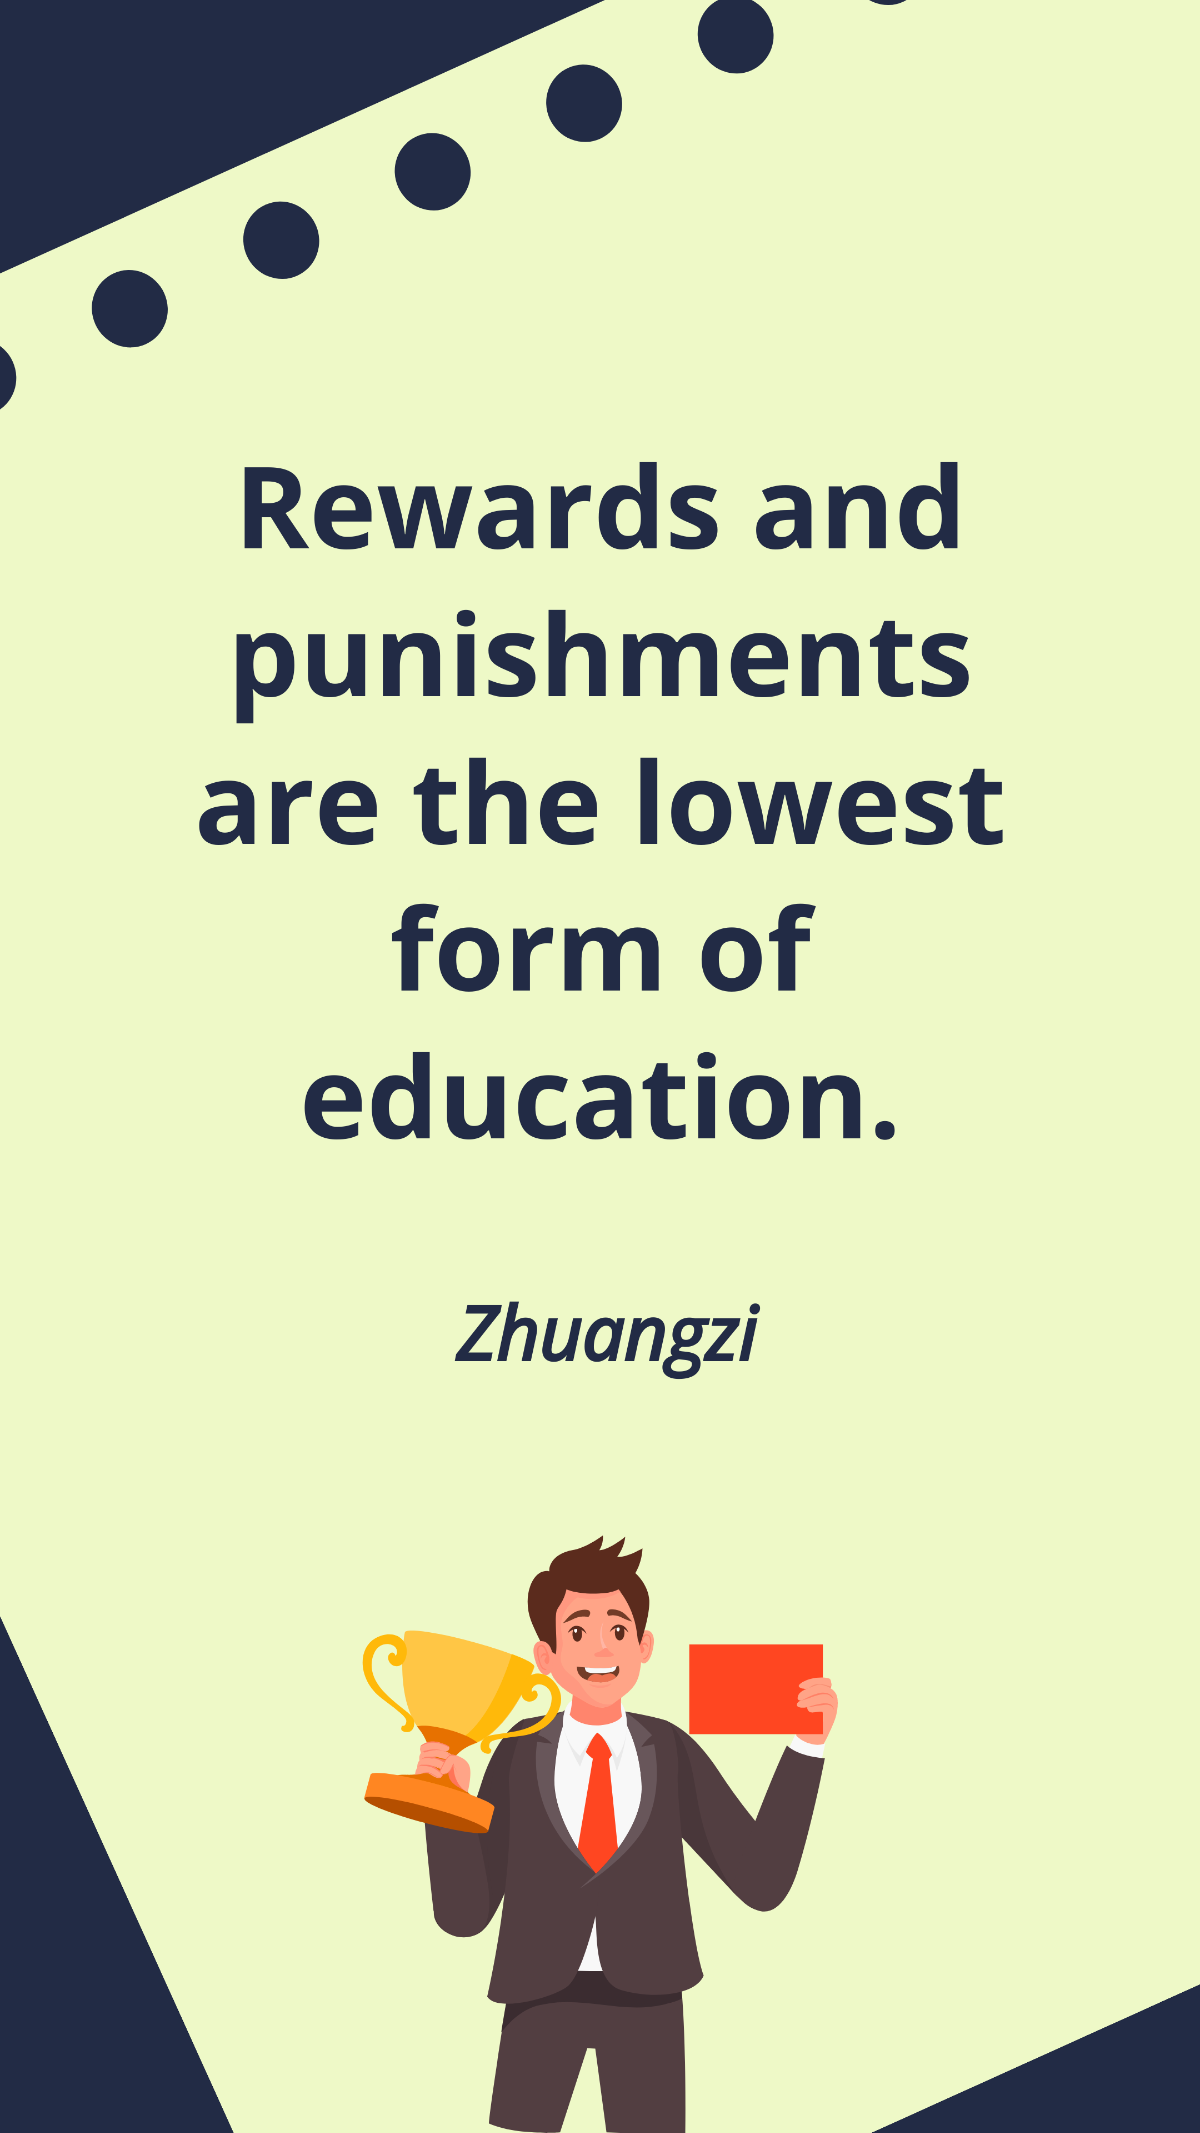 Zhuangzi - Rewards and punishments are the lowest form of education. Template